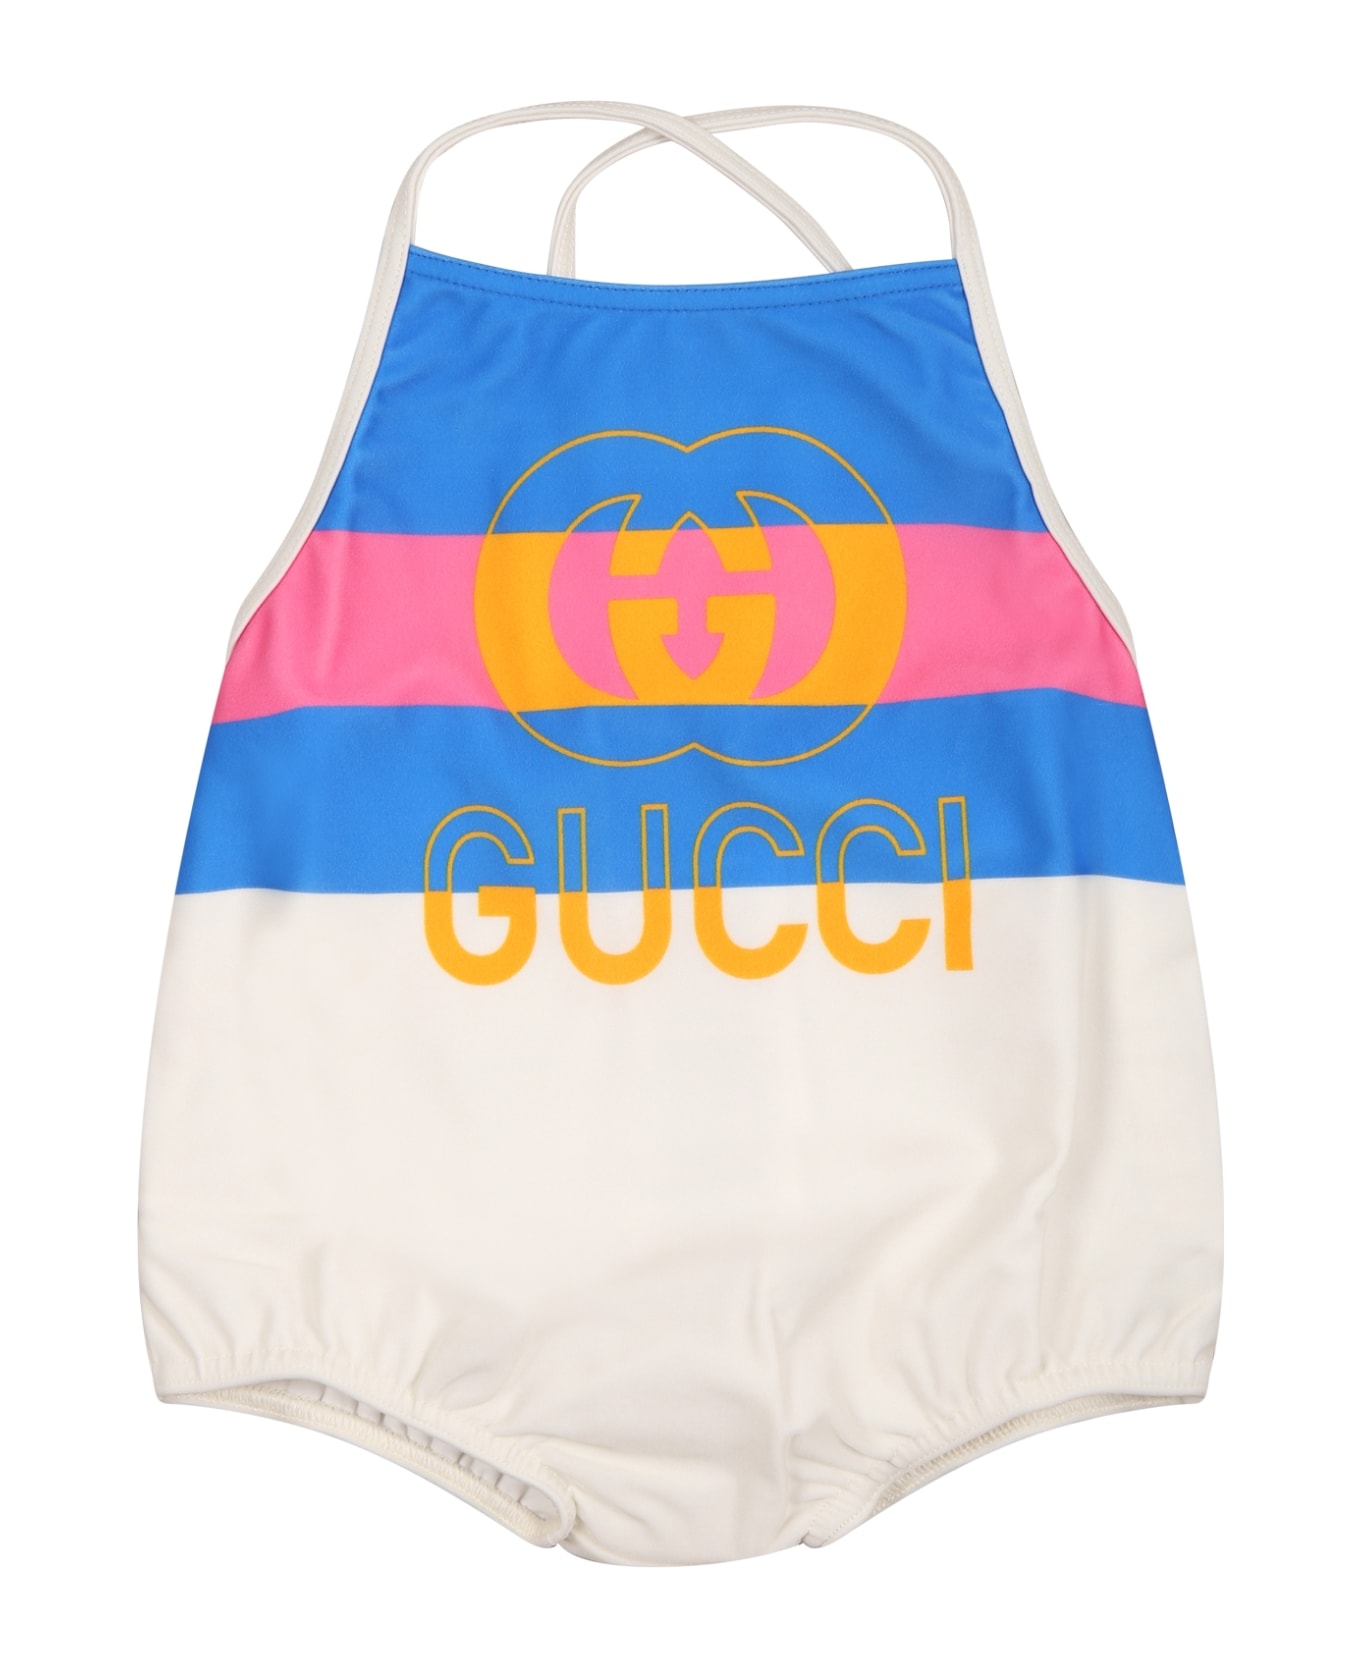 Gucci Ivory Swimssuit For Baby Girl With Vinatge Print And Iconic Double Gg - Multicolor